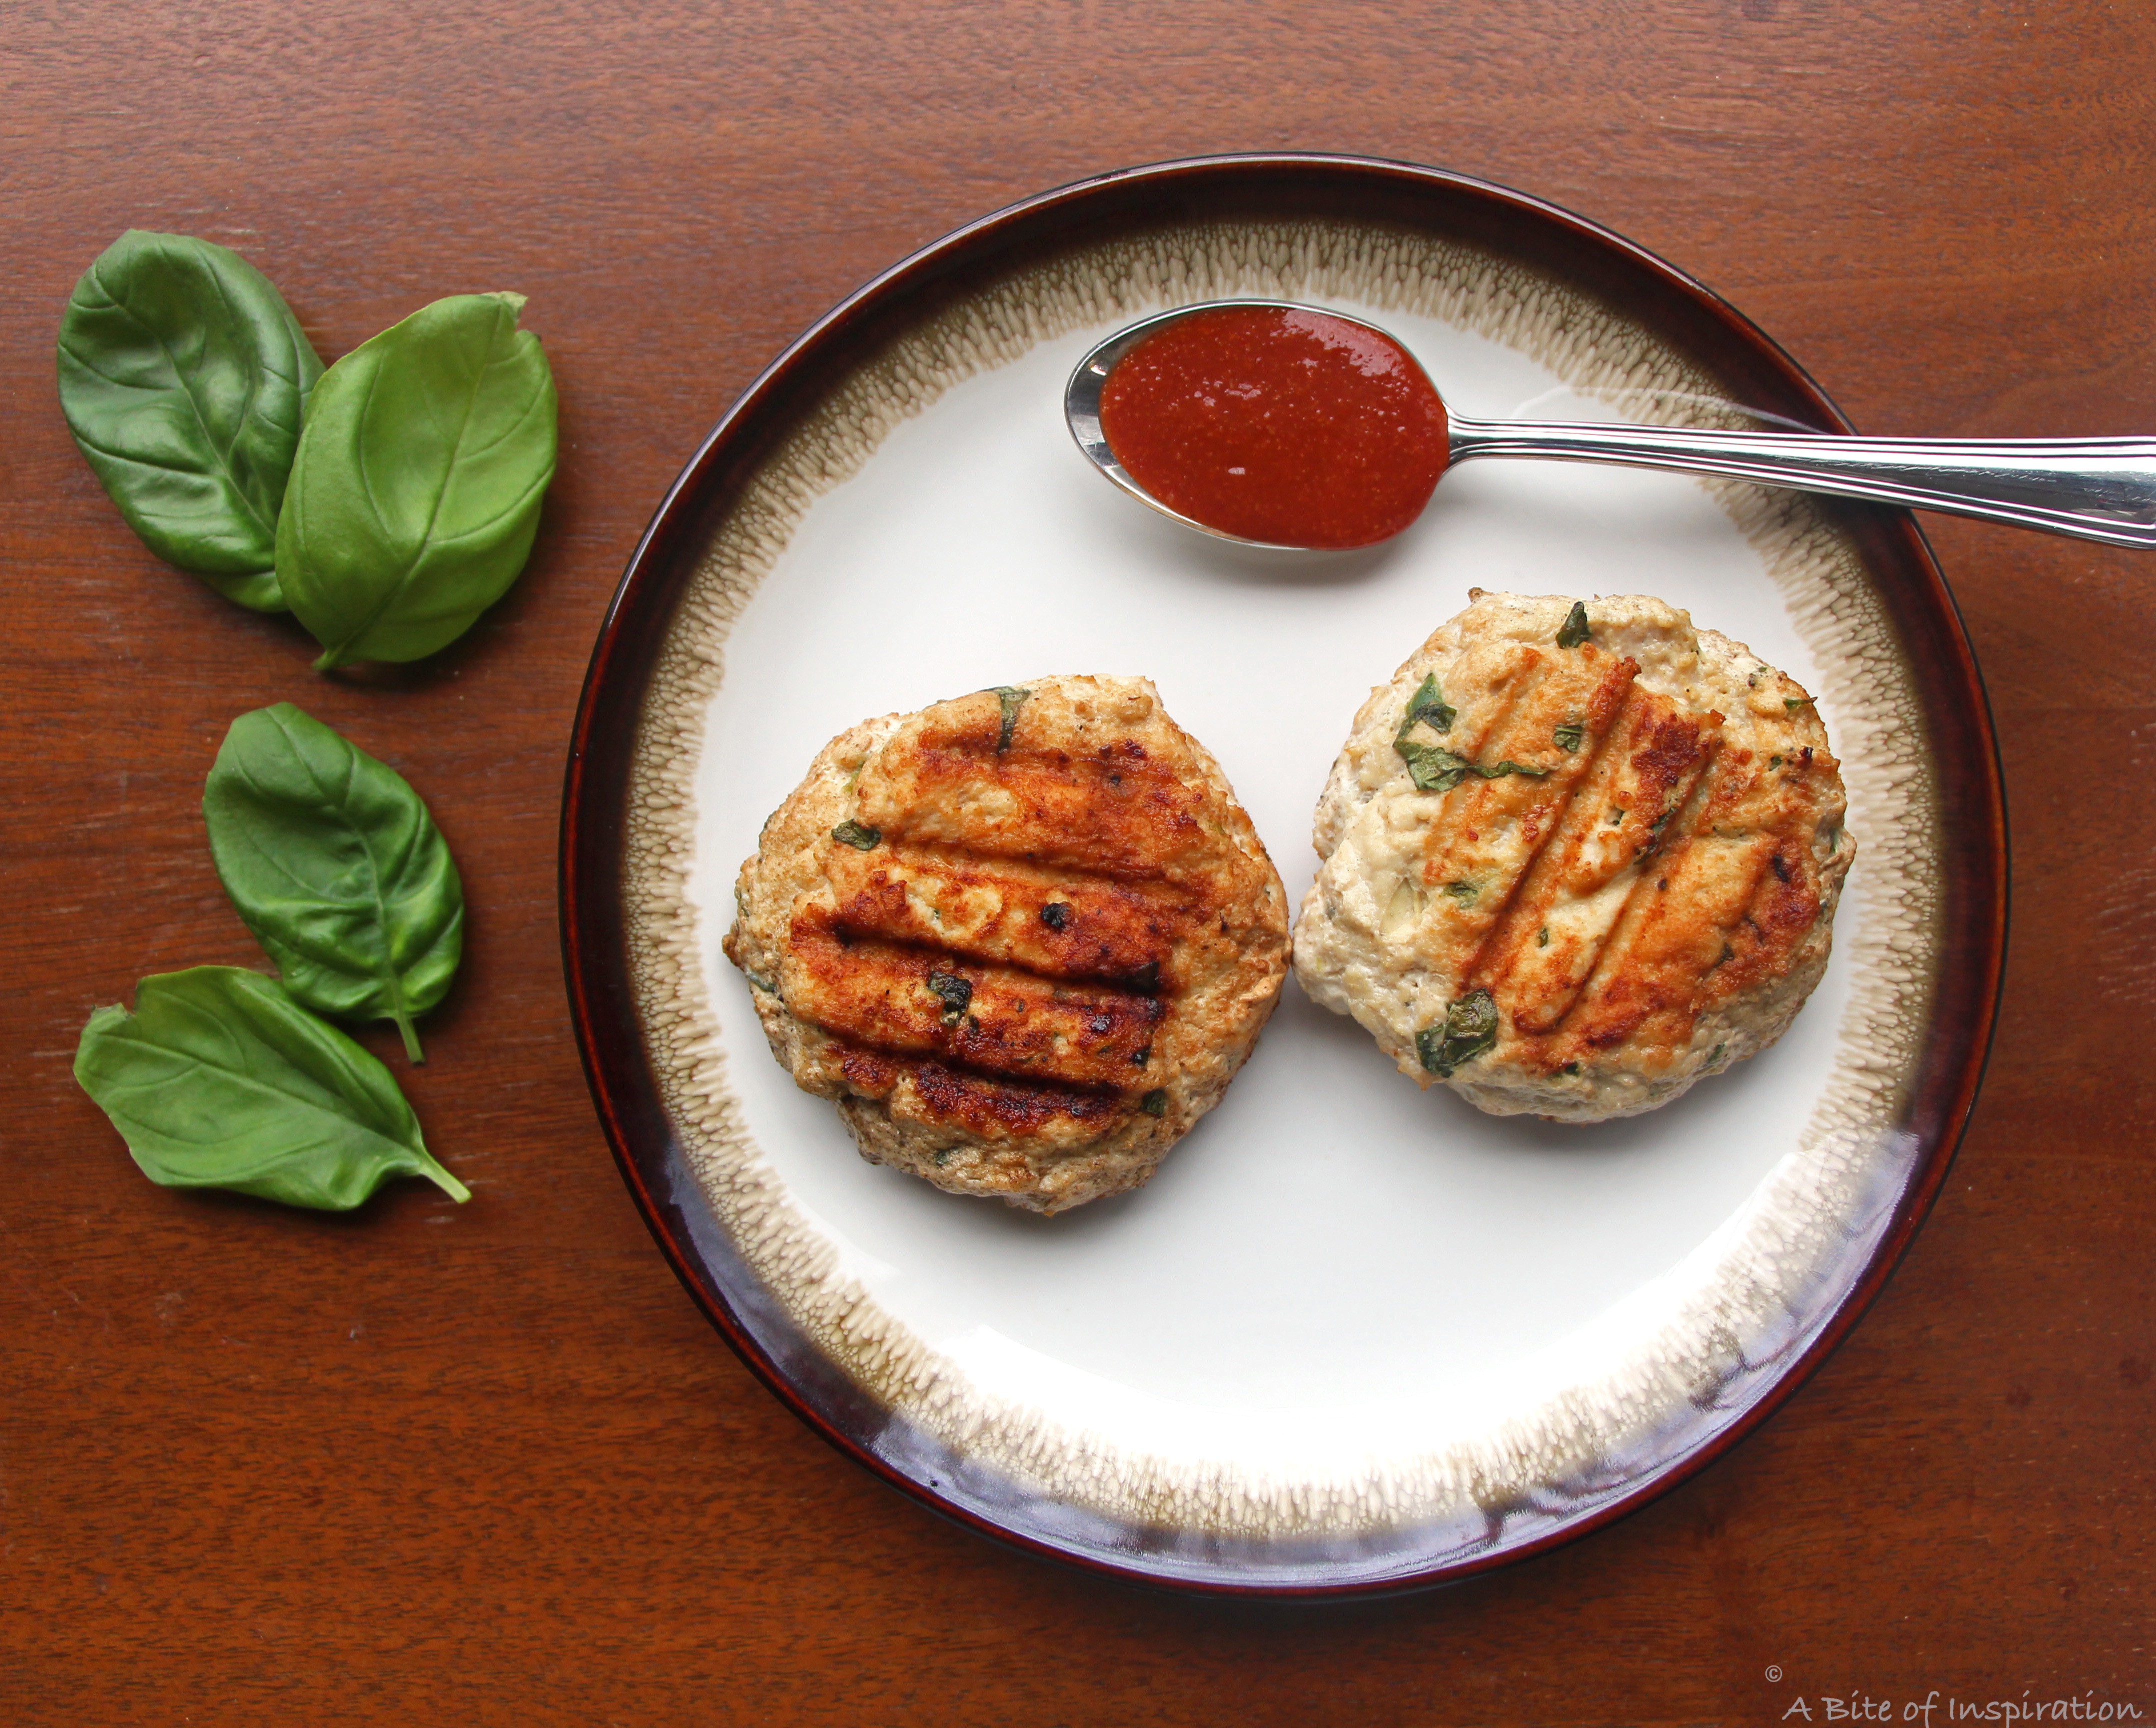 Two Thai-Style Chicken Burgers without buns, with Sriracha and basil on the side 